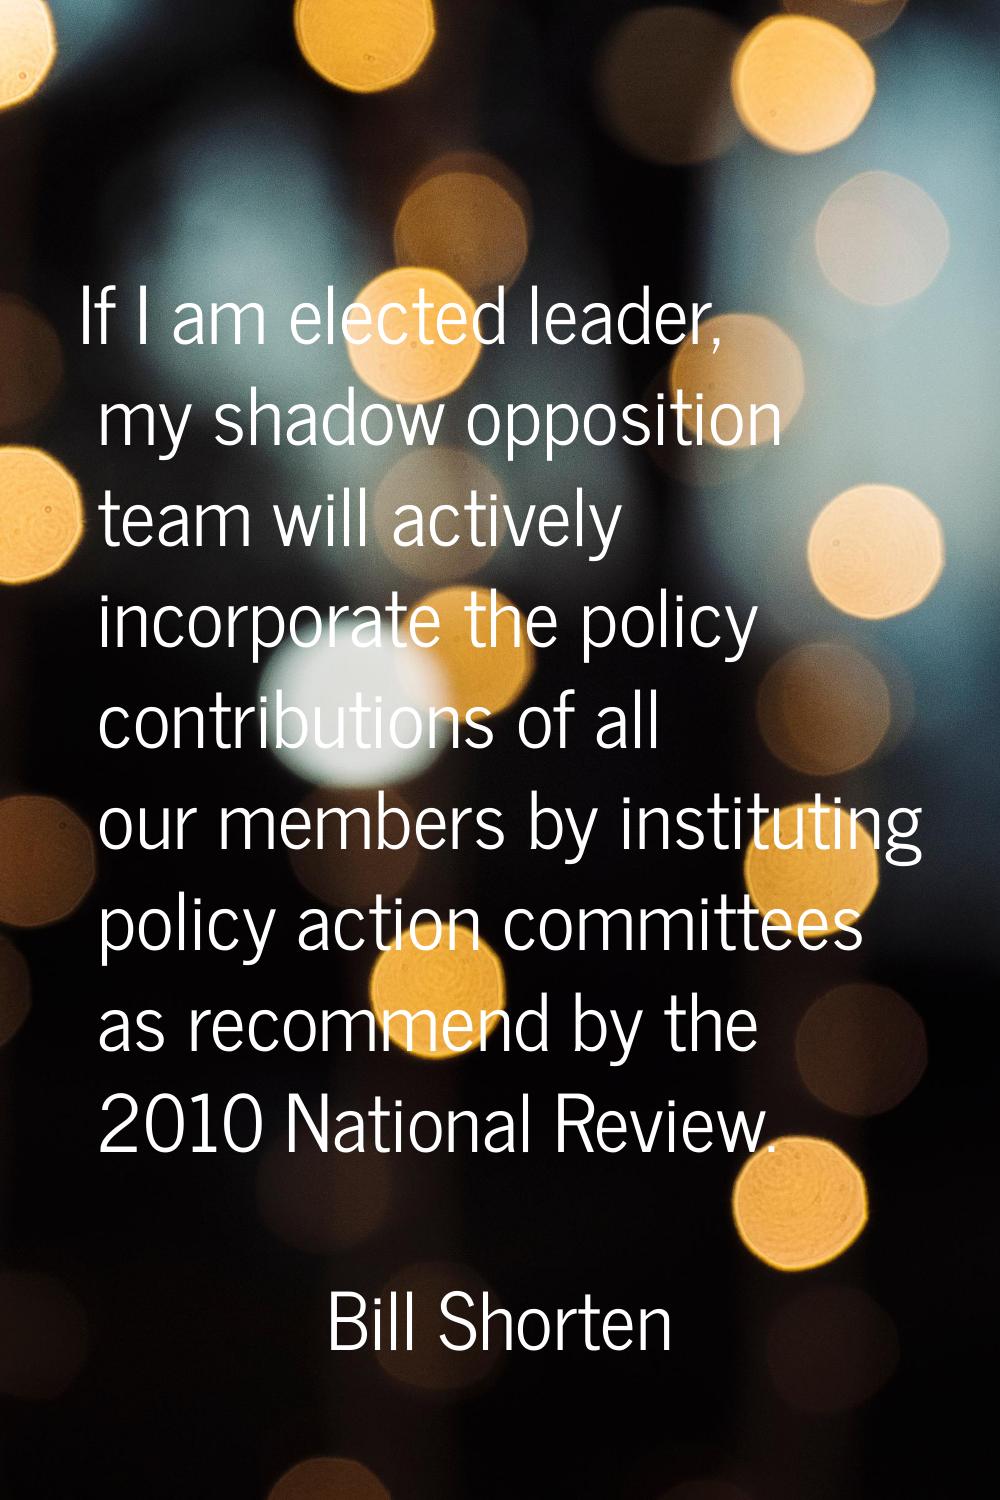 If I am elected leader, my shadow opposition team will actively incorporate the policy contribution